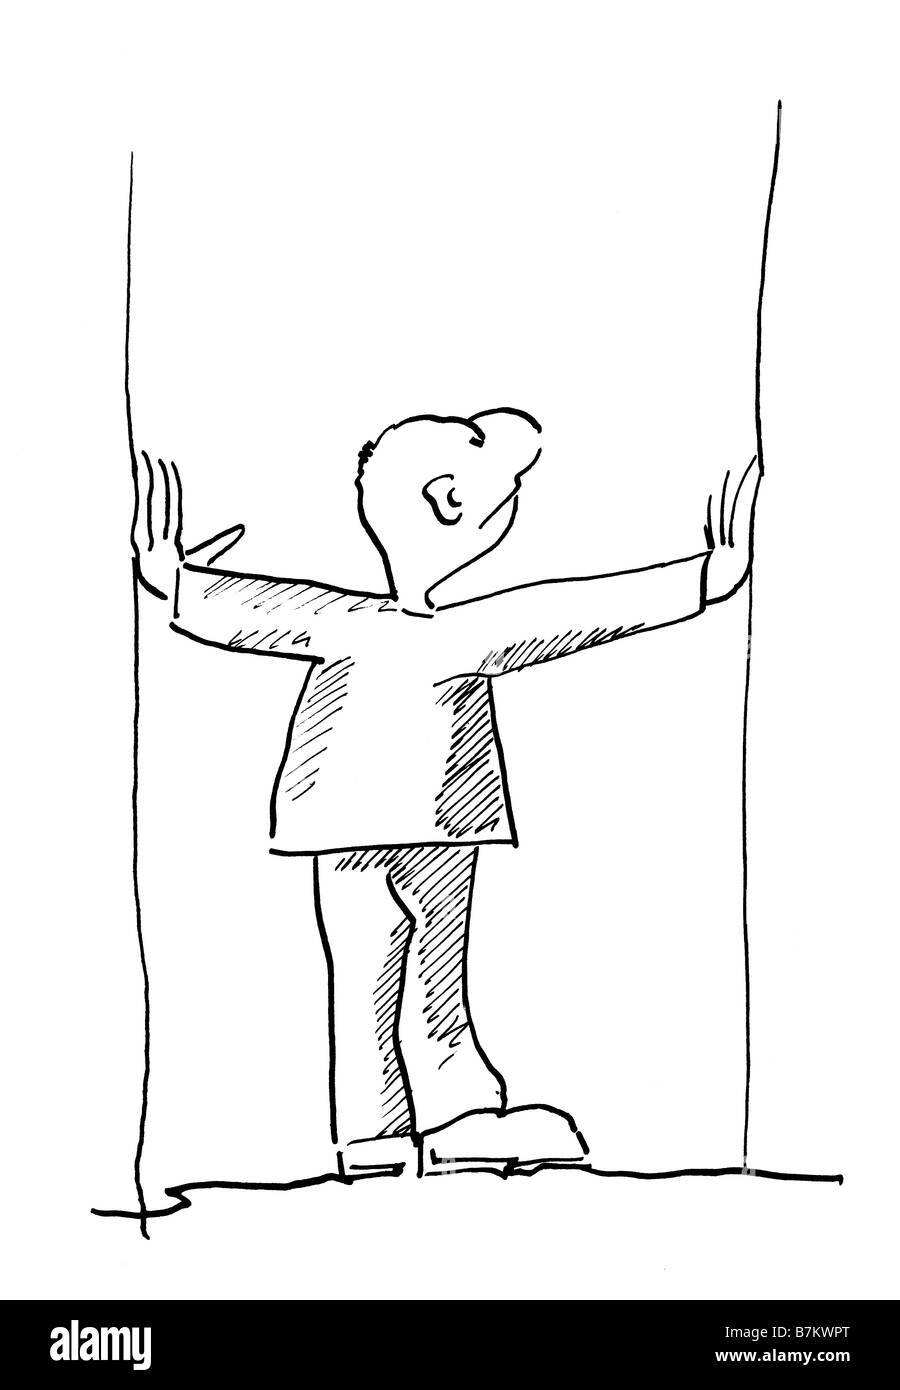 Illustration, Man with arms outstretched, rear view Stock Photo